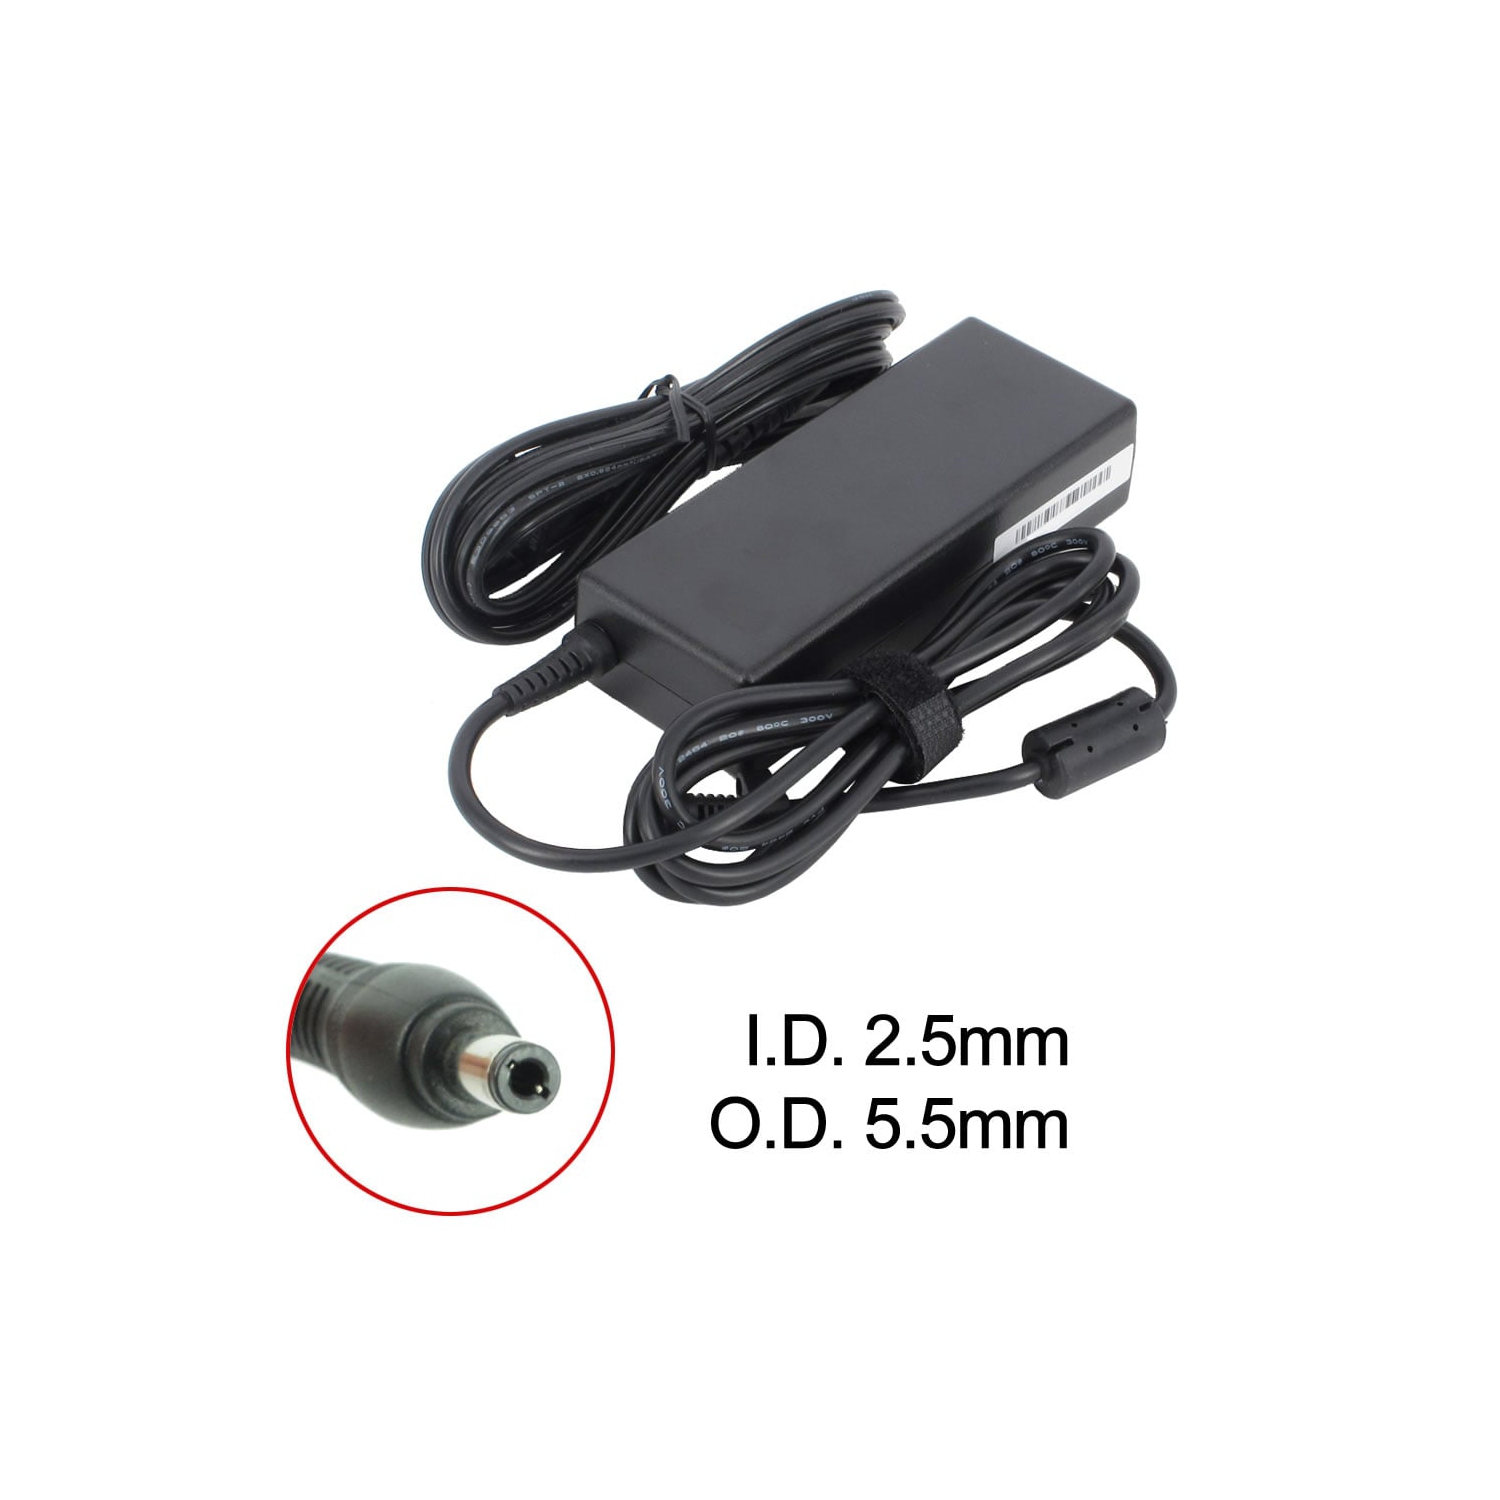 BATTDEPOT New Laptop AC Adapter for NEC LL700R/73DH 103942 808-875692-010A 9T458 ADP-65 HB BBEF PA-1900-36 SA80-3115